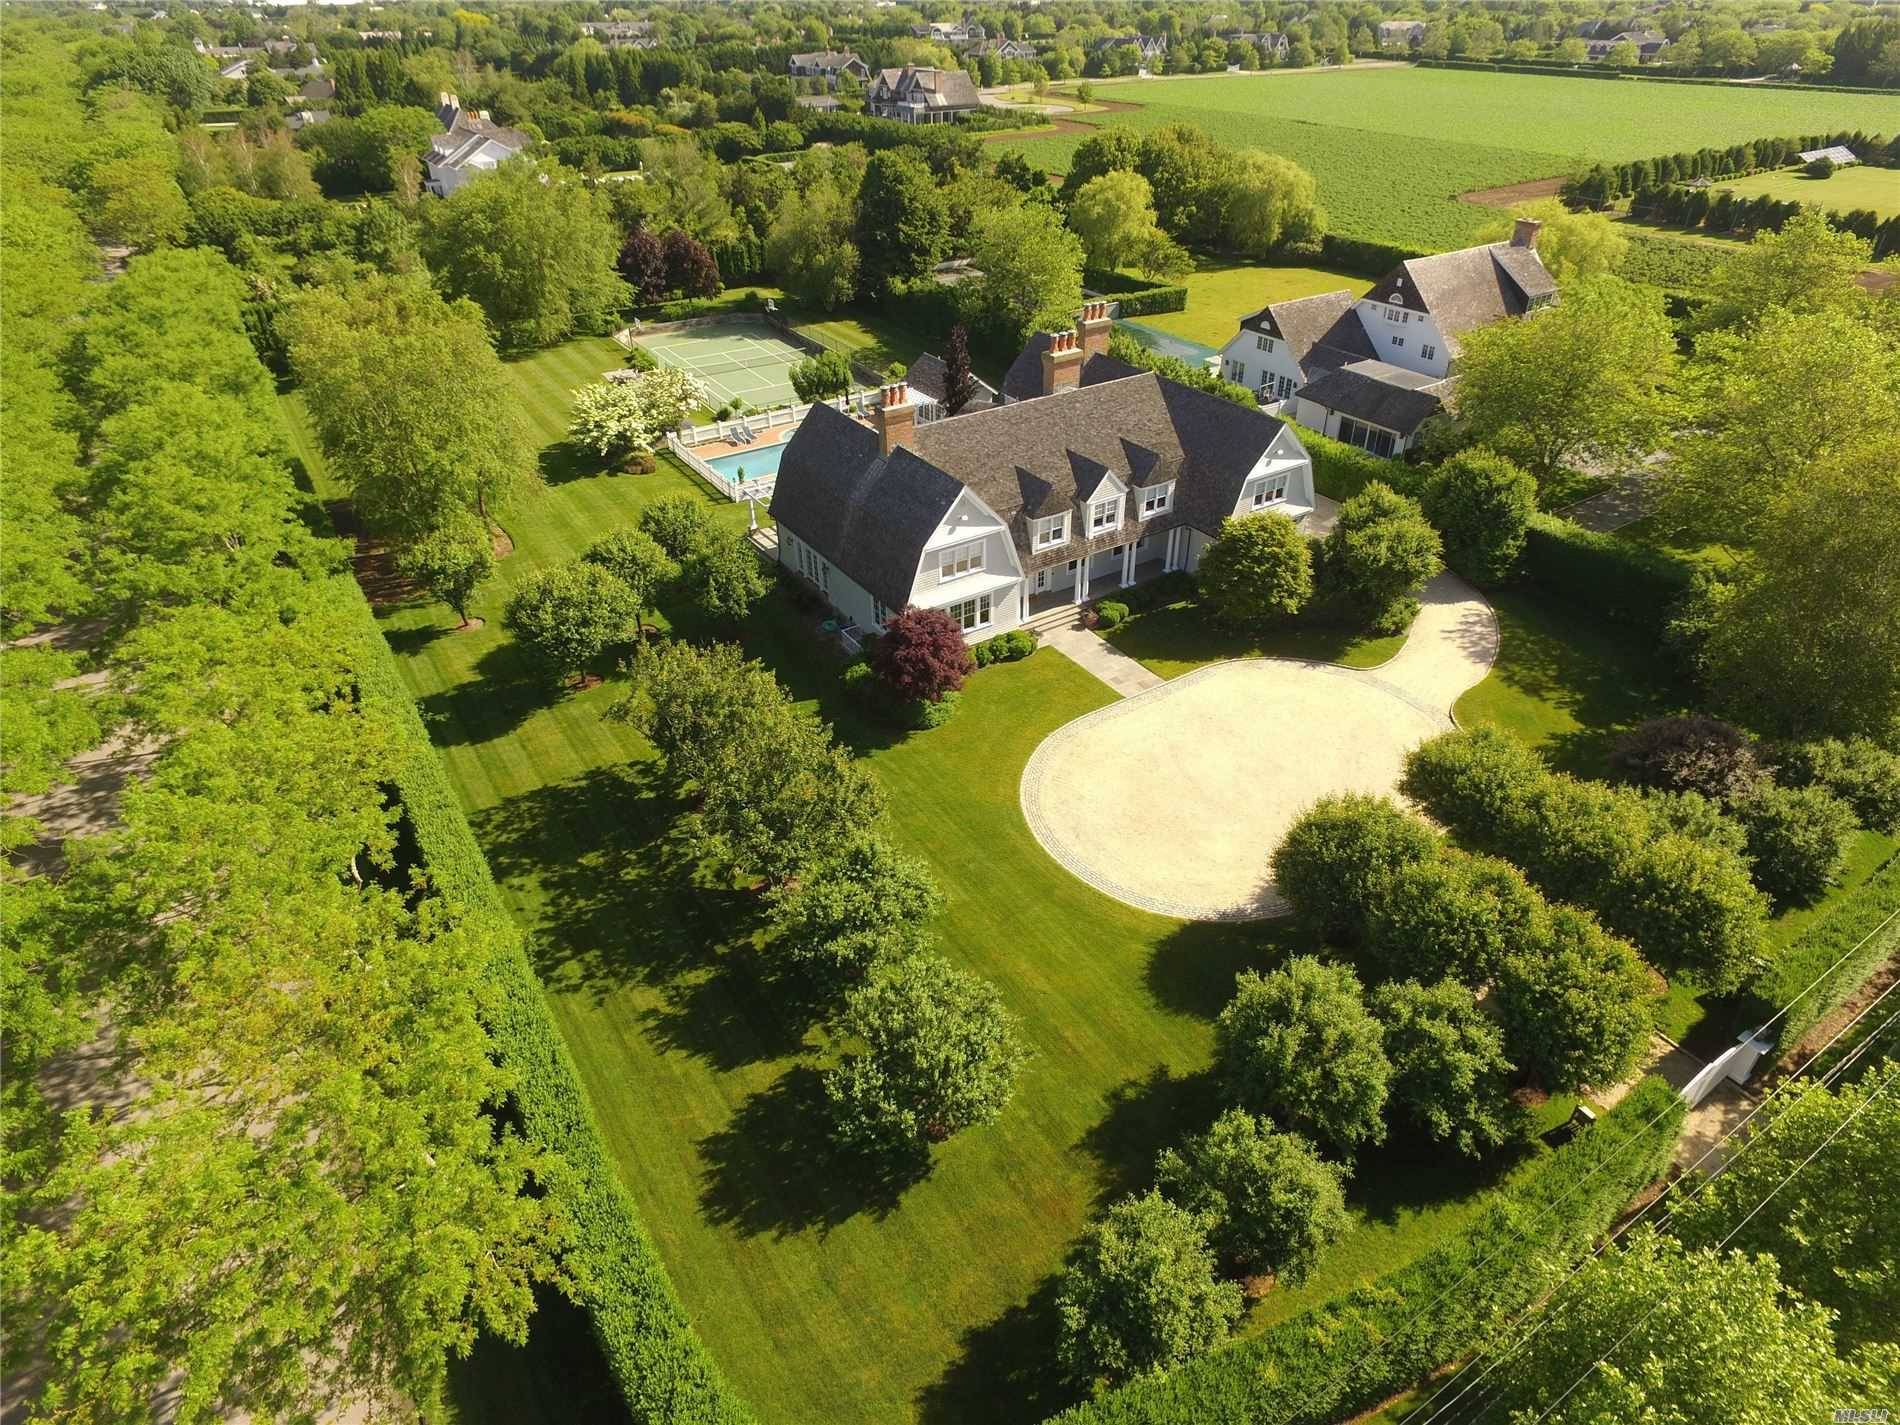 The Beachmont Impeccably maintained, this home rests on 2 acres in the Village of Southampton.